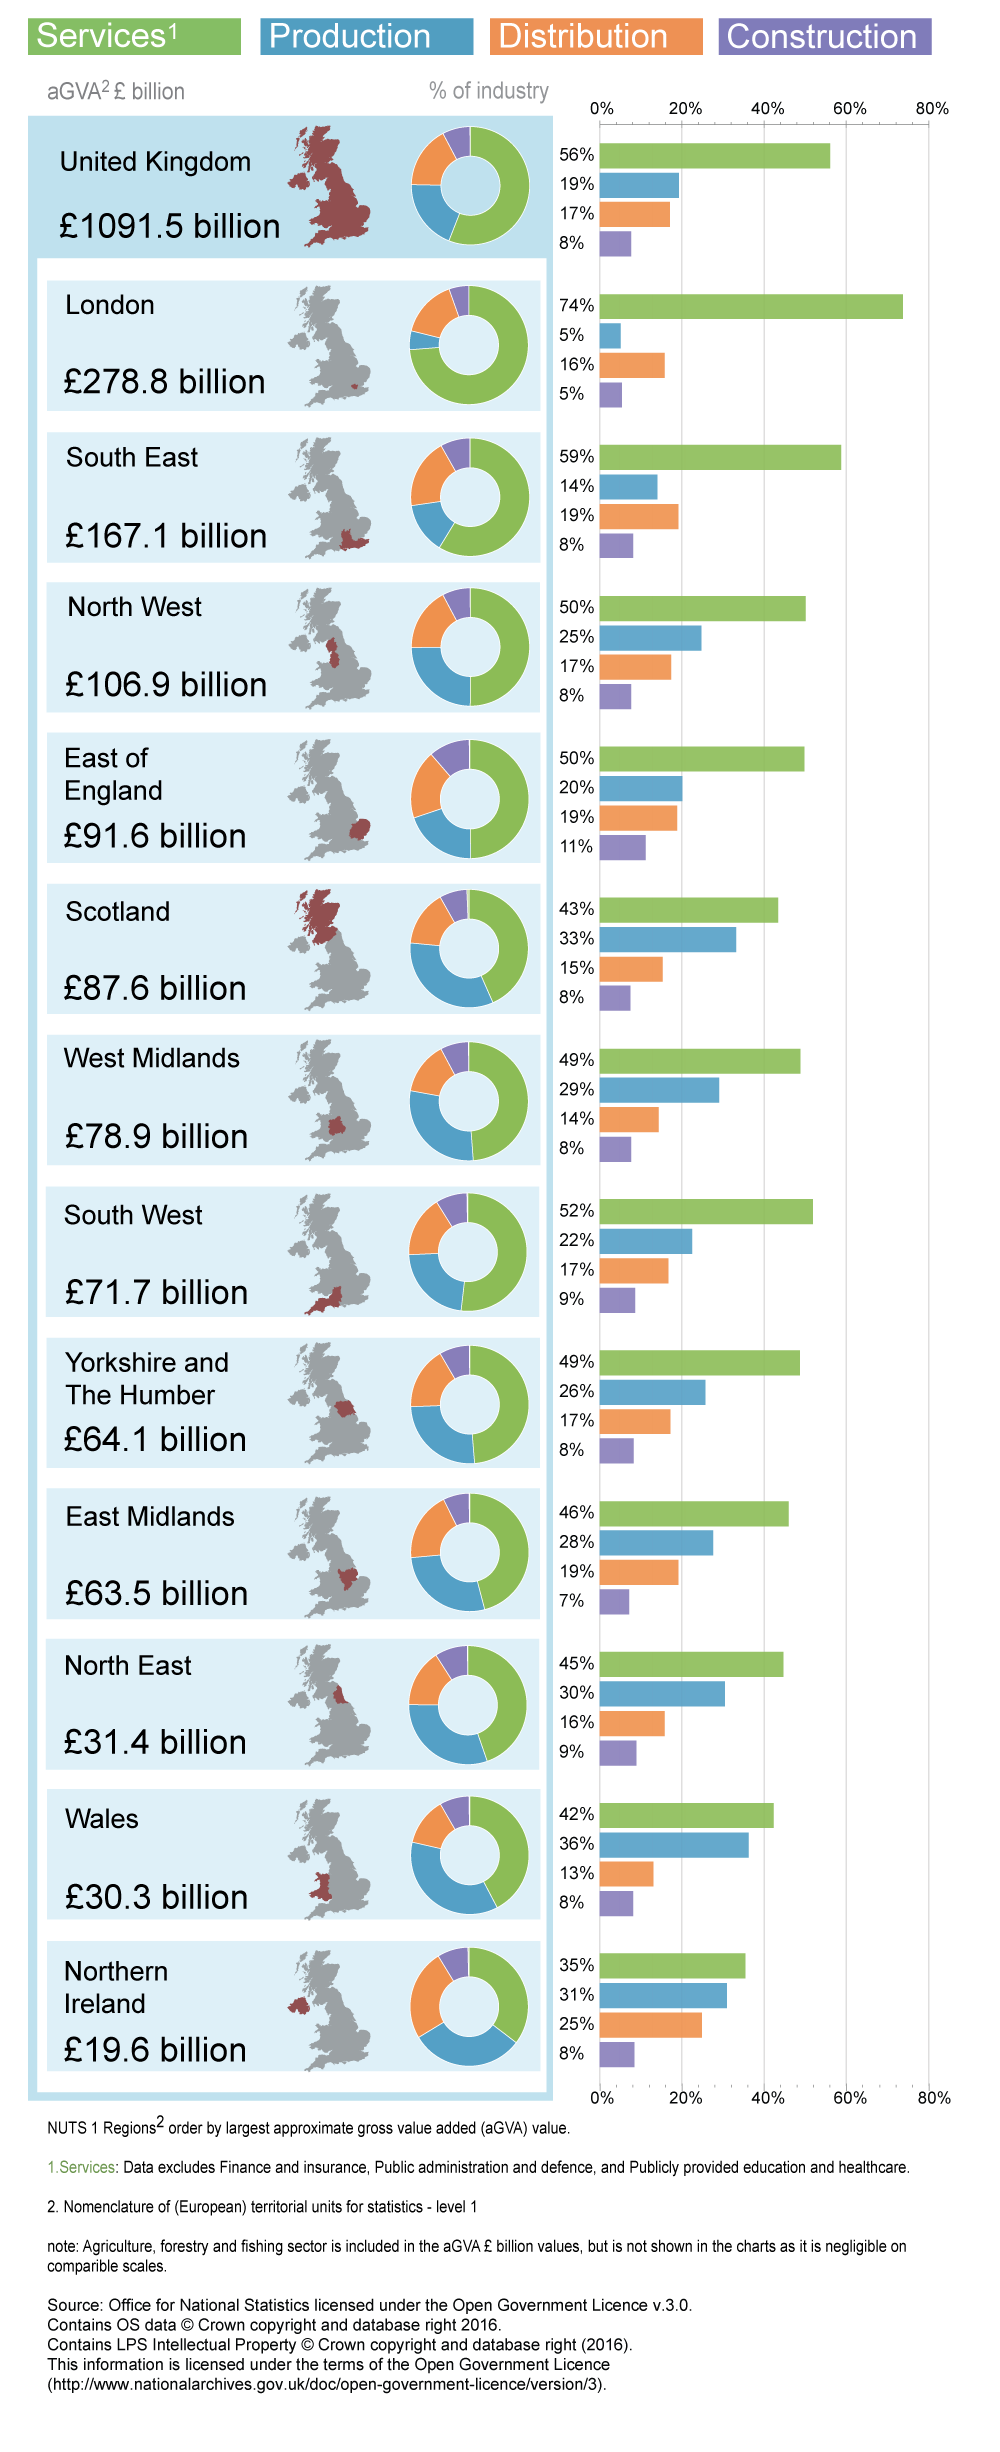 Non-financial services is the largest sector in terms of aGVA for all 12 regions of the UK.